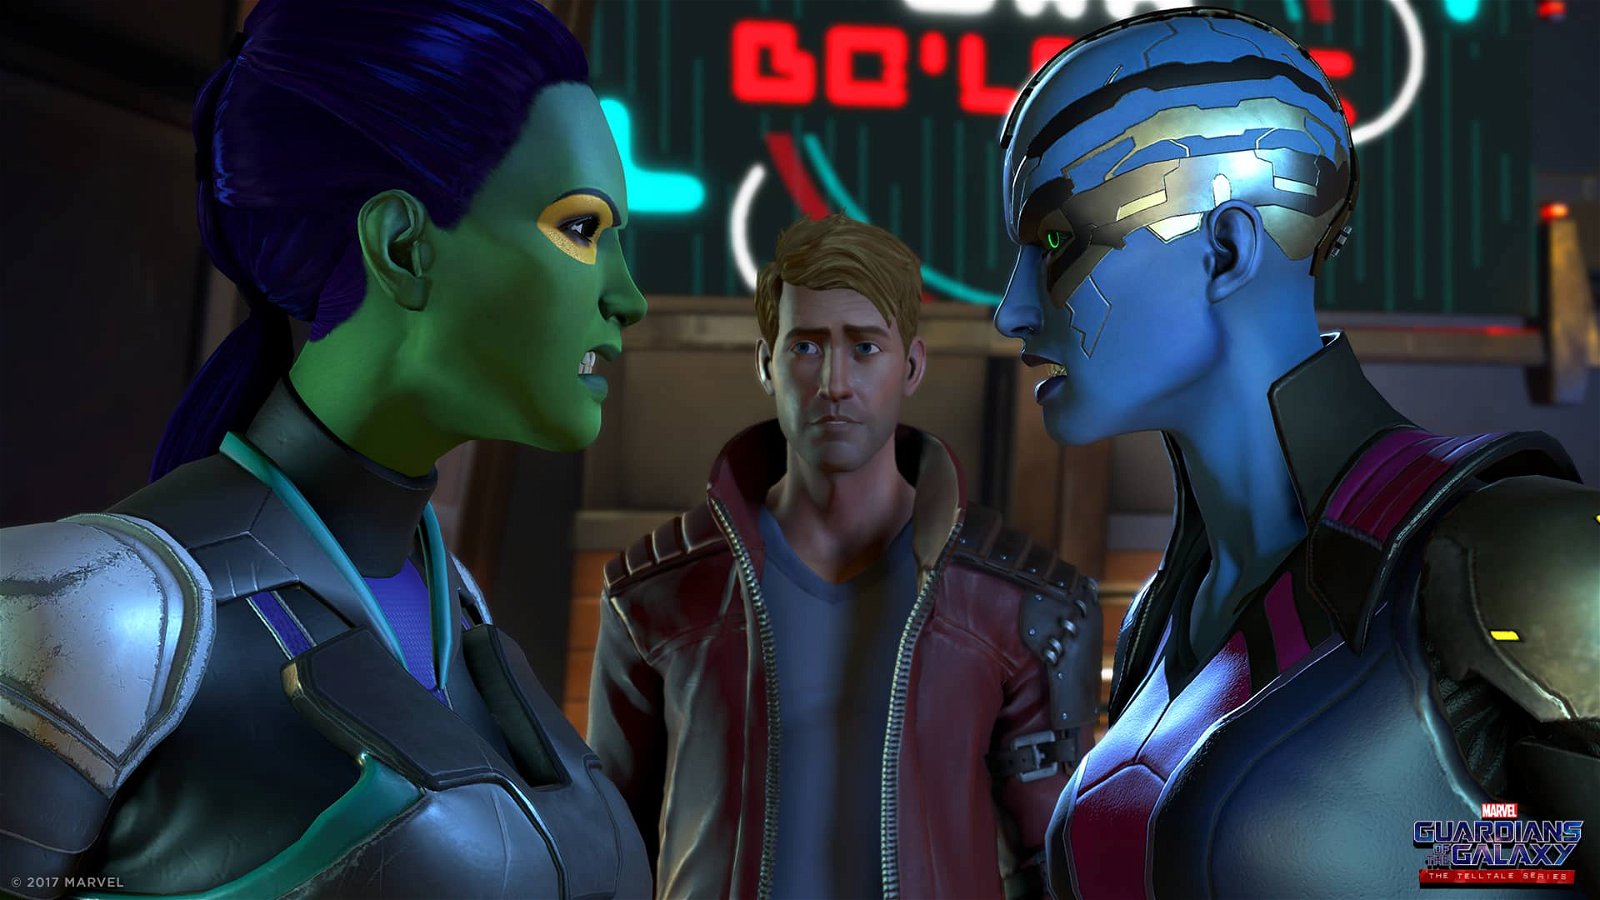 Guardians Of The Galaxy: A Telltale Series Episode 3: “More Than A Feeling” (Ps4) 5